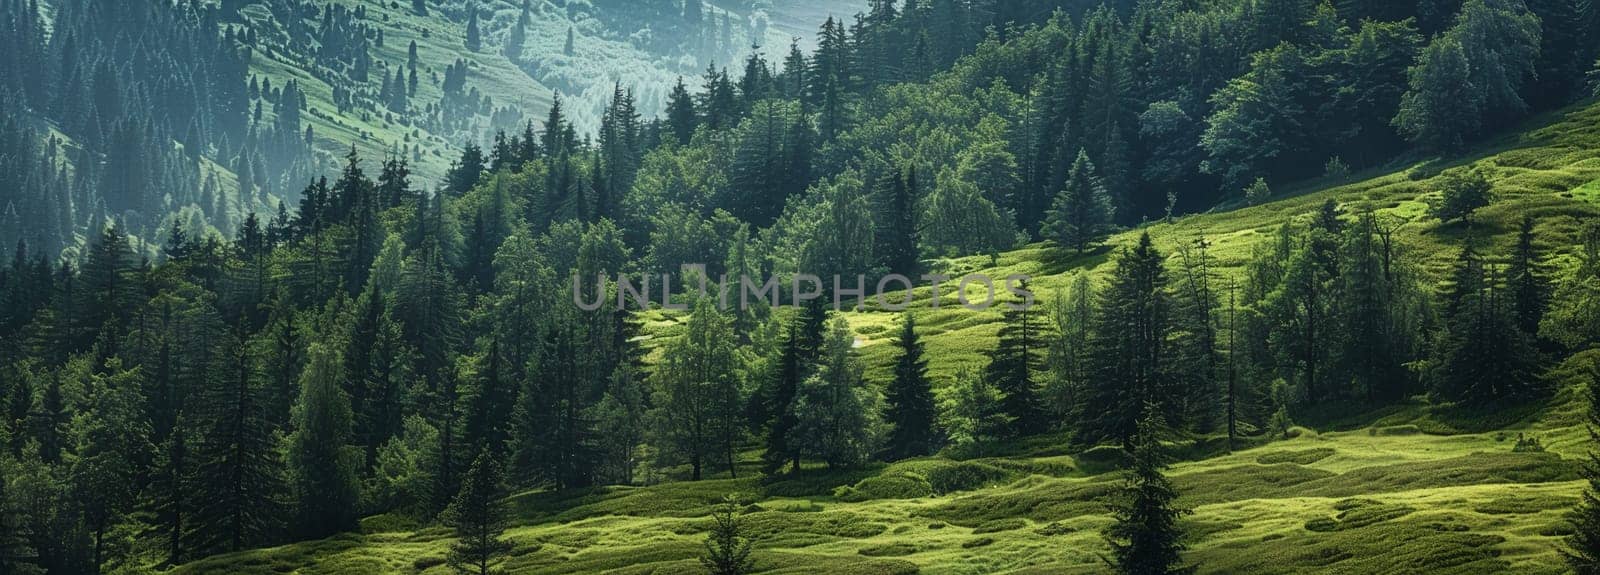 Vibrant green summer forest landscape bathed in sunlight, depicting tranquility and natural beauty for serene nature backdrops and graphic design.